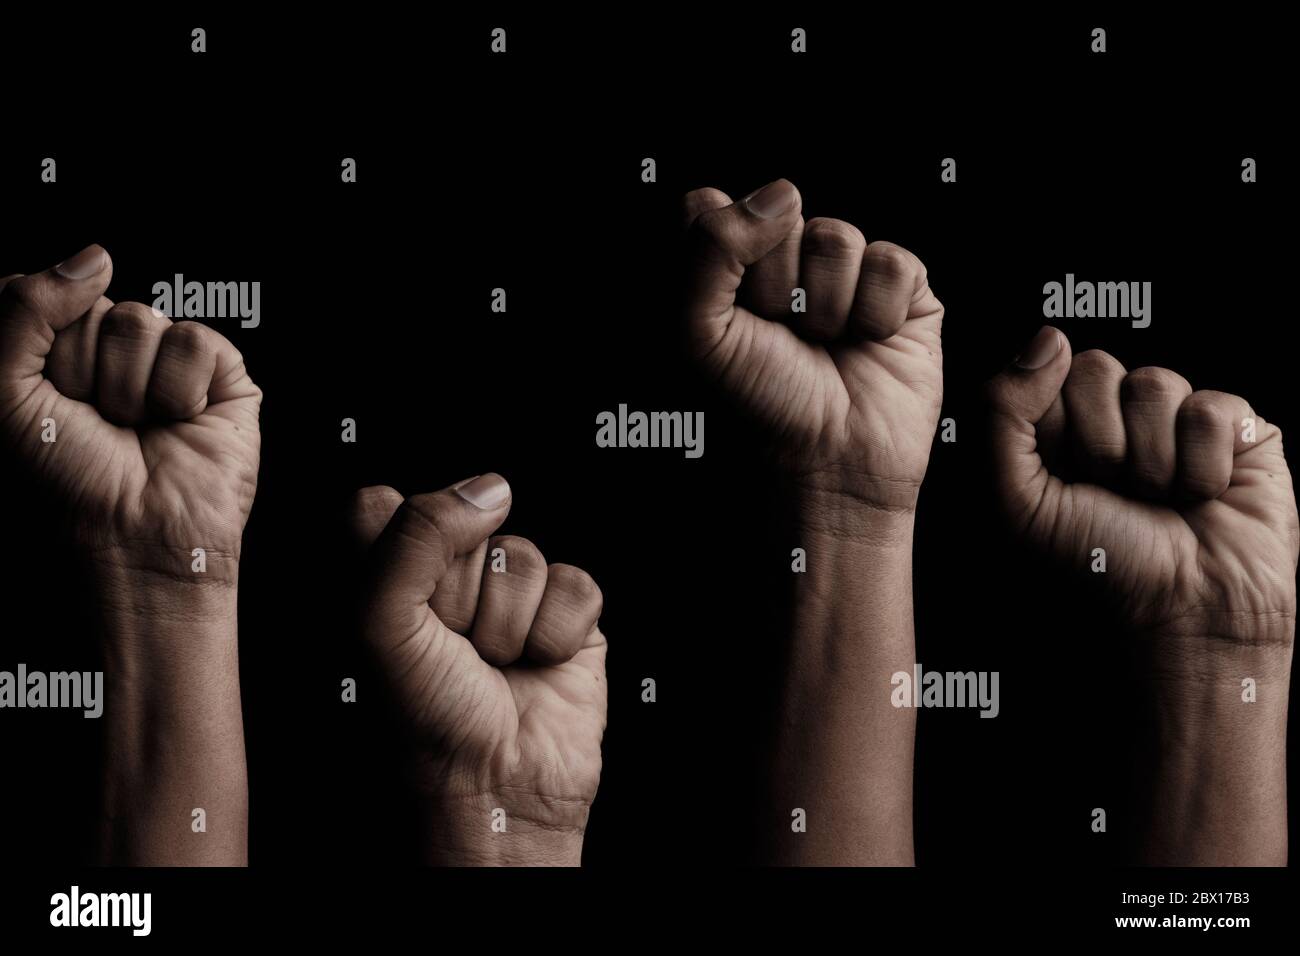 Concept against racism or racial discrimination by showing with hand gestures fist or solidarity Stock Photo